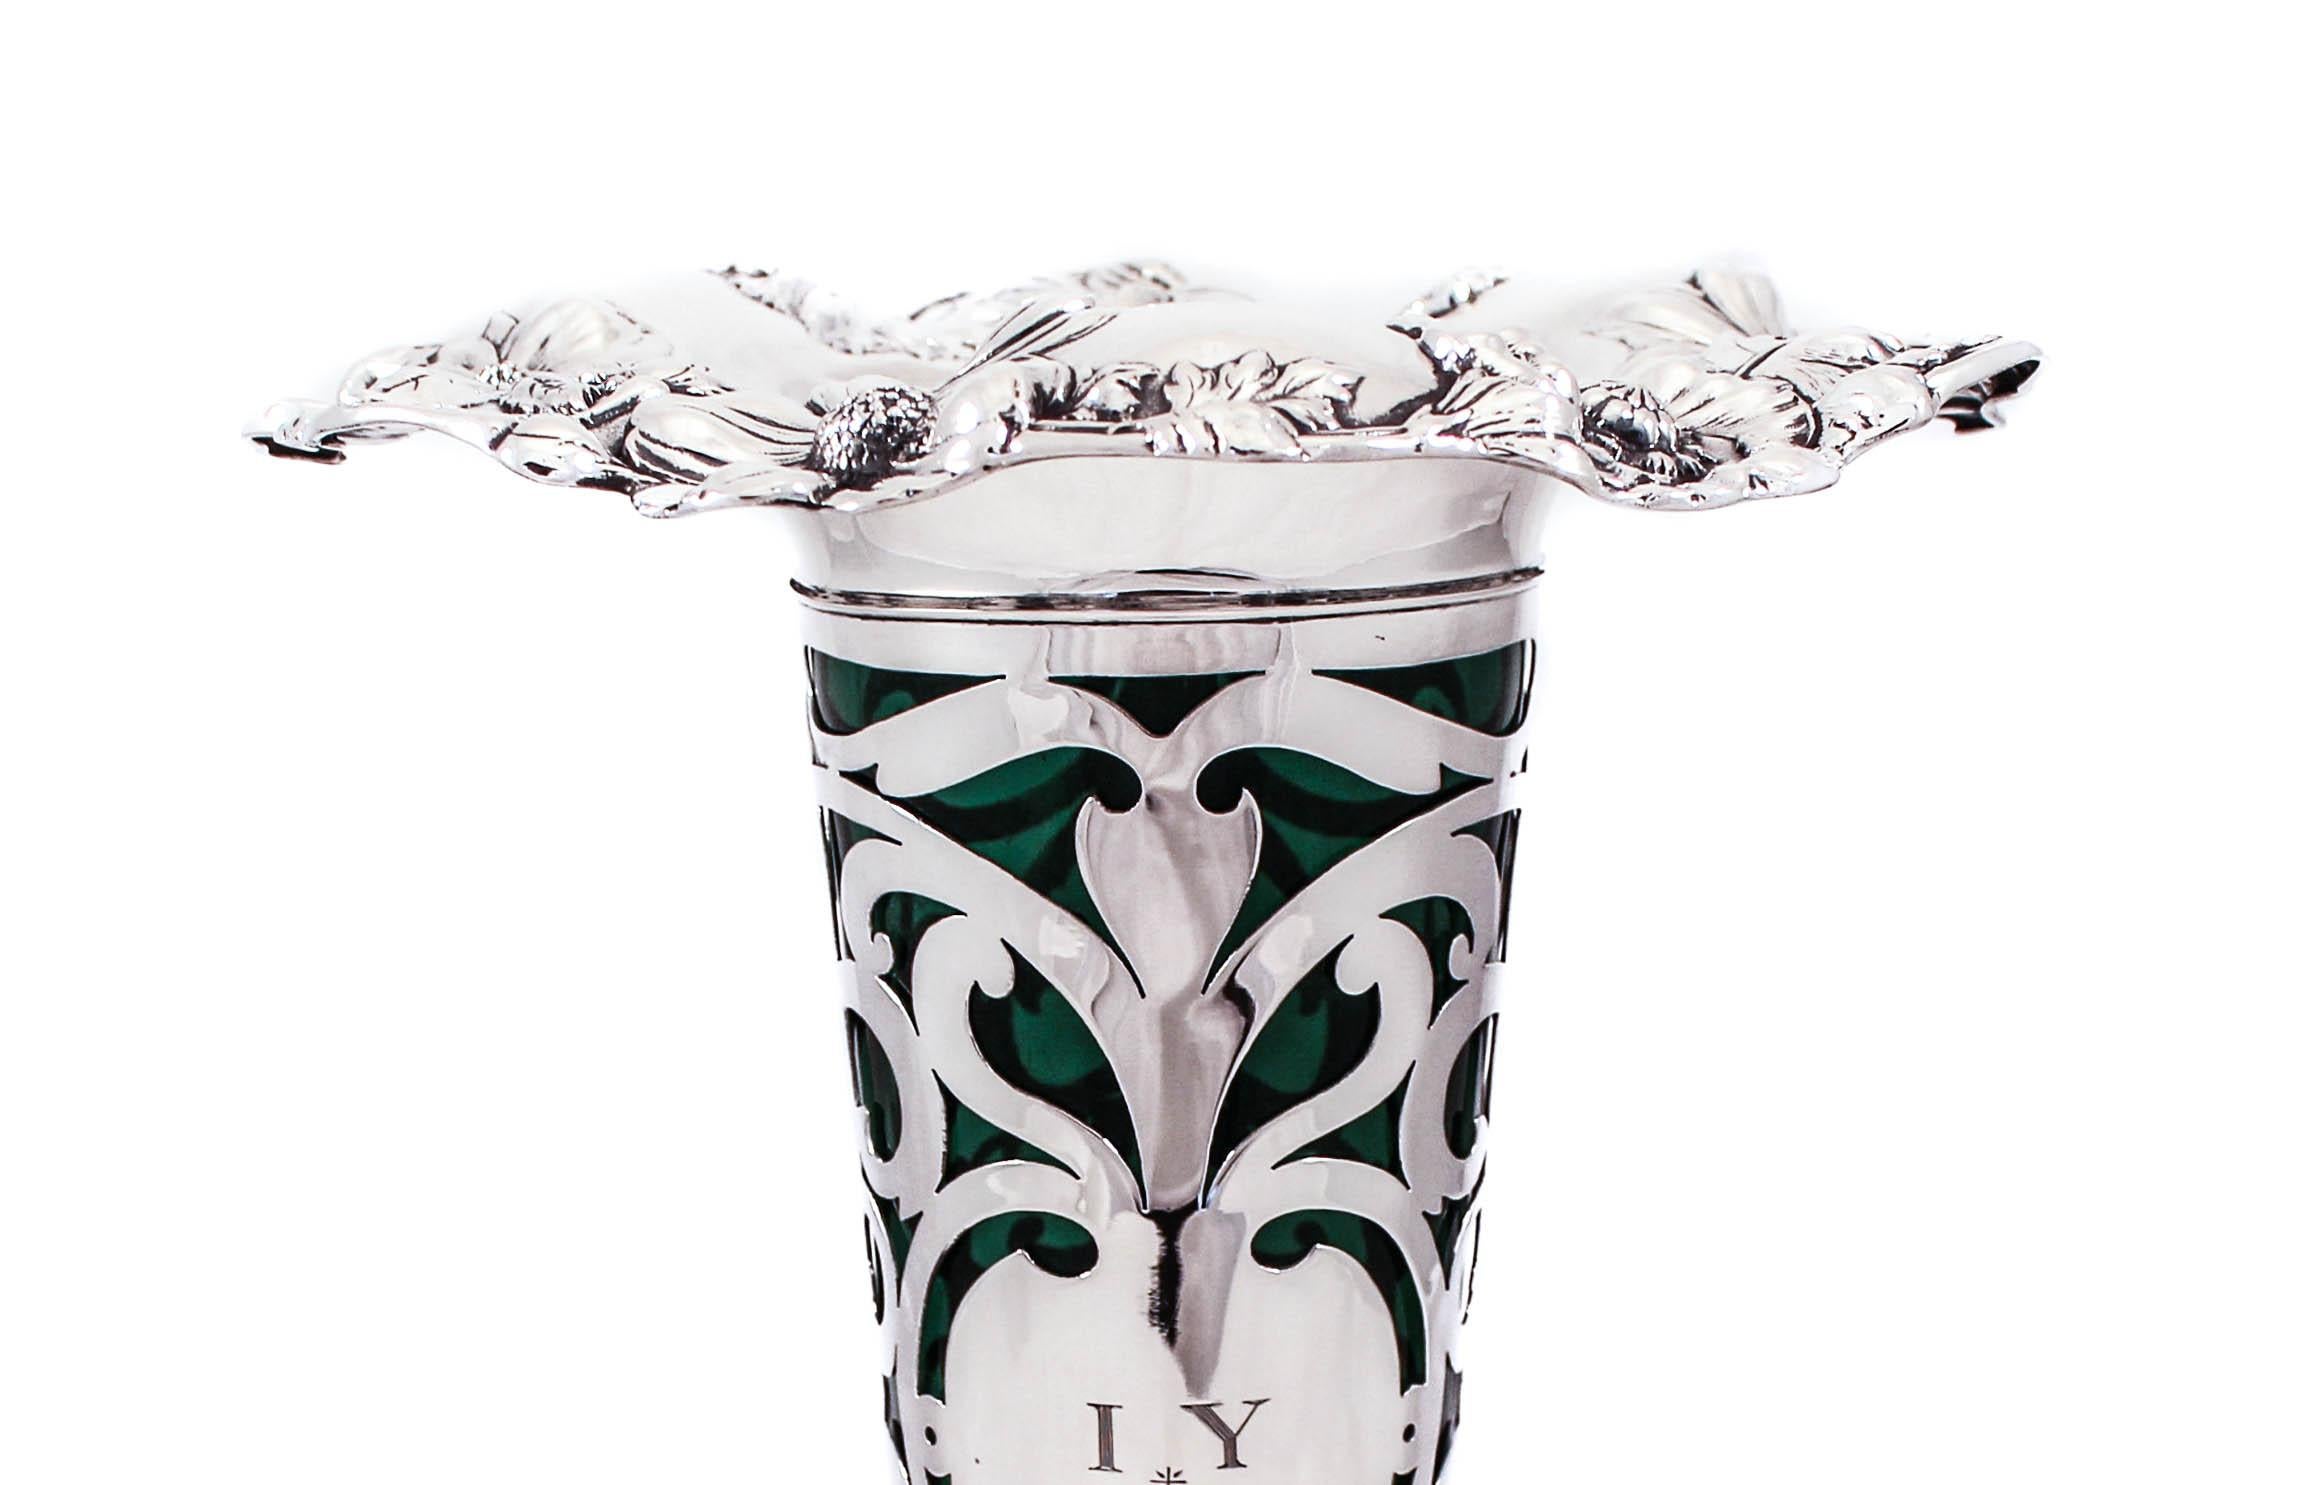 We are delighted to offer this rare sterling silver vase by Reed and Barton from the early 1900’s. Designed in the classic Art Nouveau style it has a flowers, leaves and vines decorating both top and bottom. Art Nouveau was inspired by natural forms